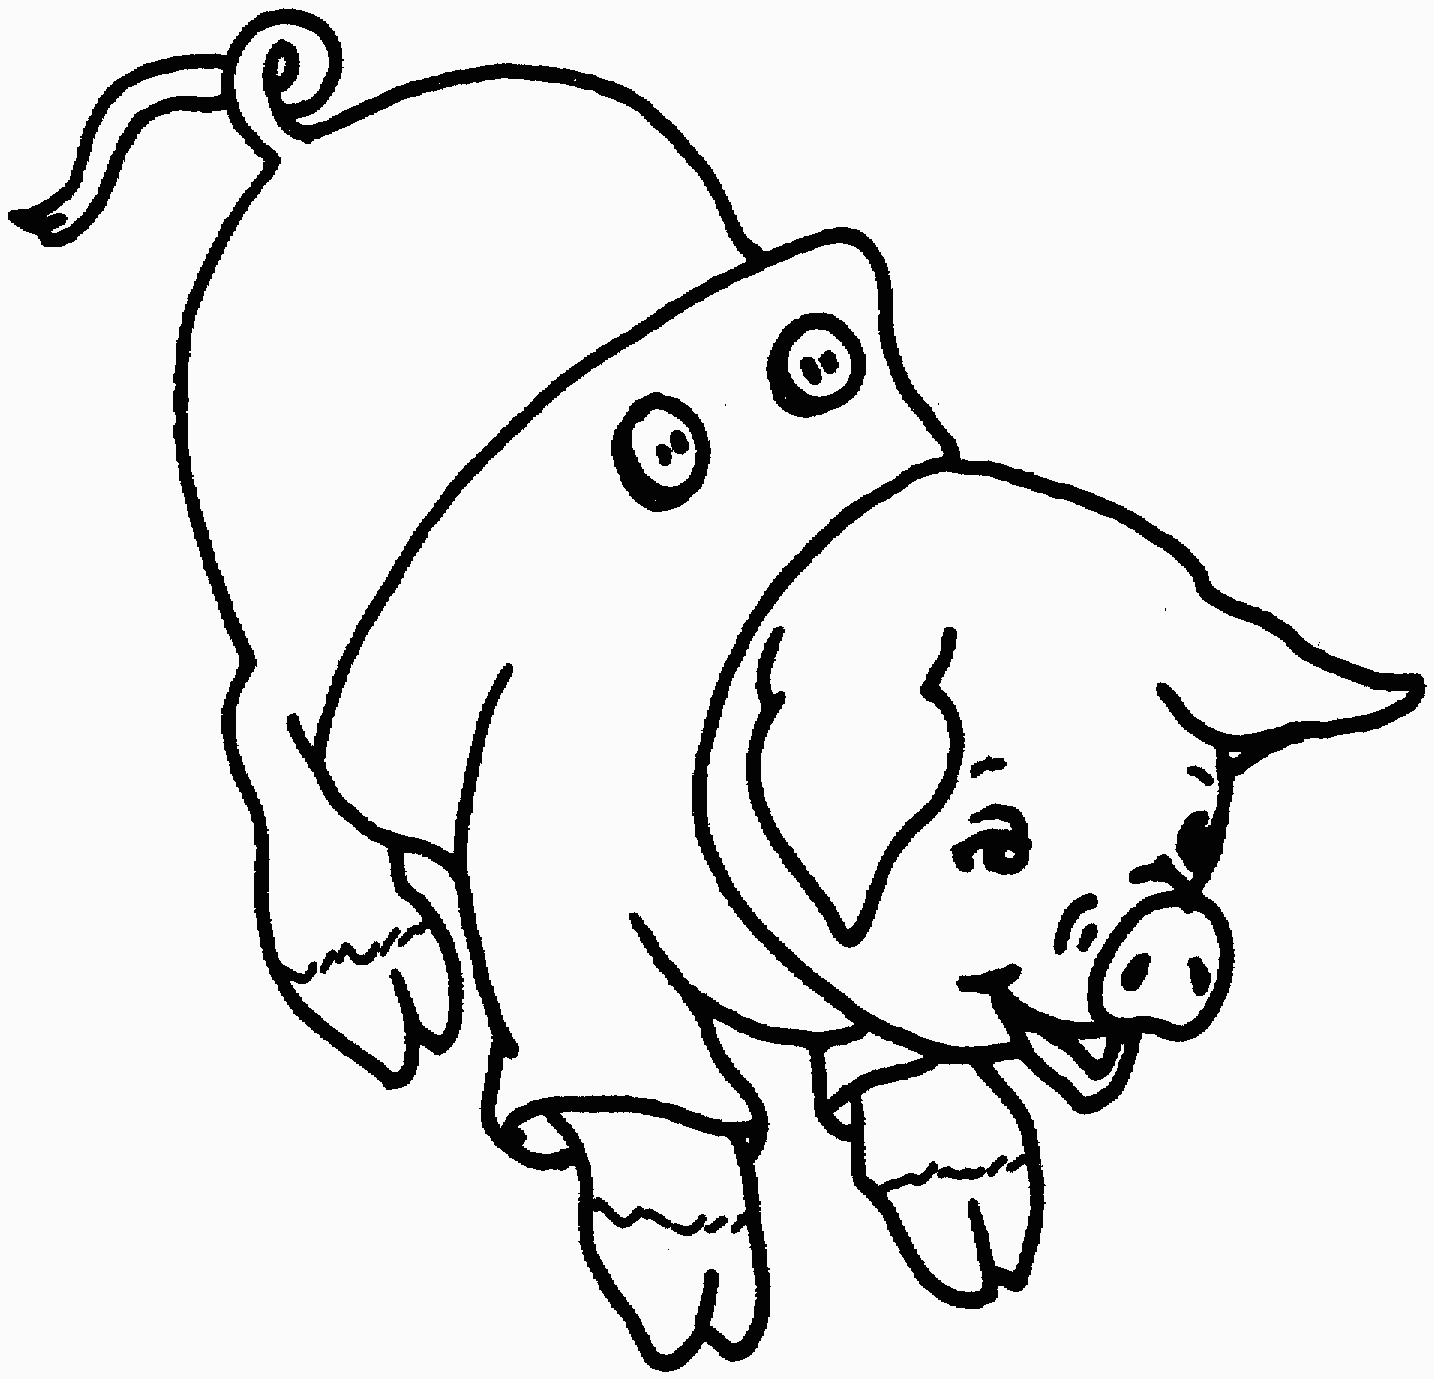 Coloring Pages: Funny Creature Pig Coloring For Kids Print To Free - Pig Coloring Sheets Free Printable